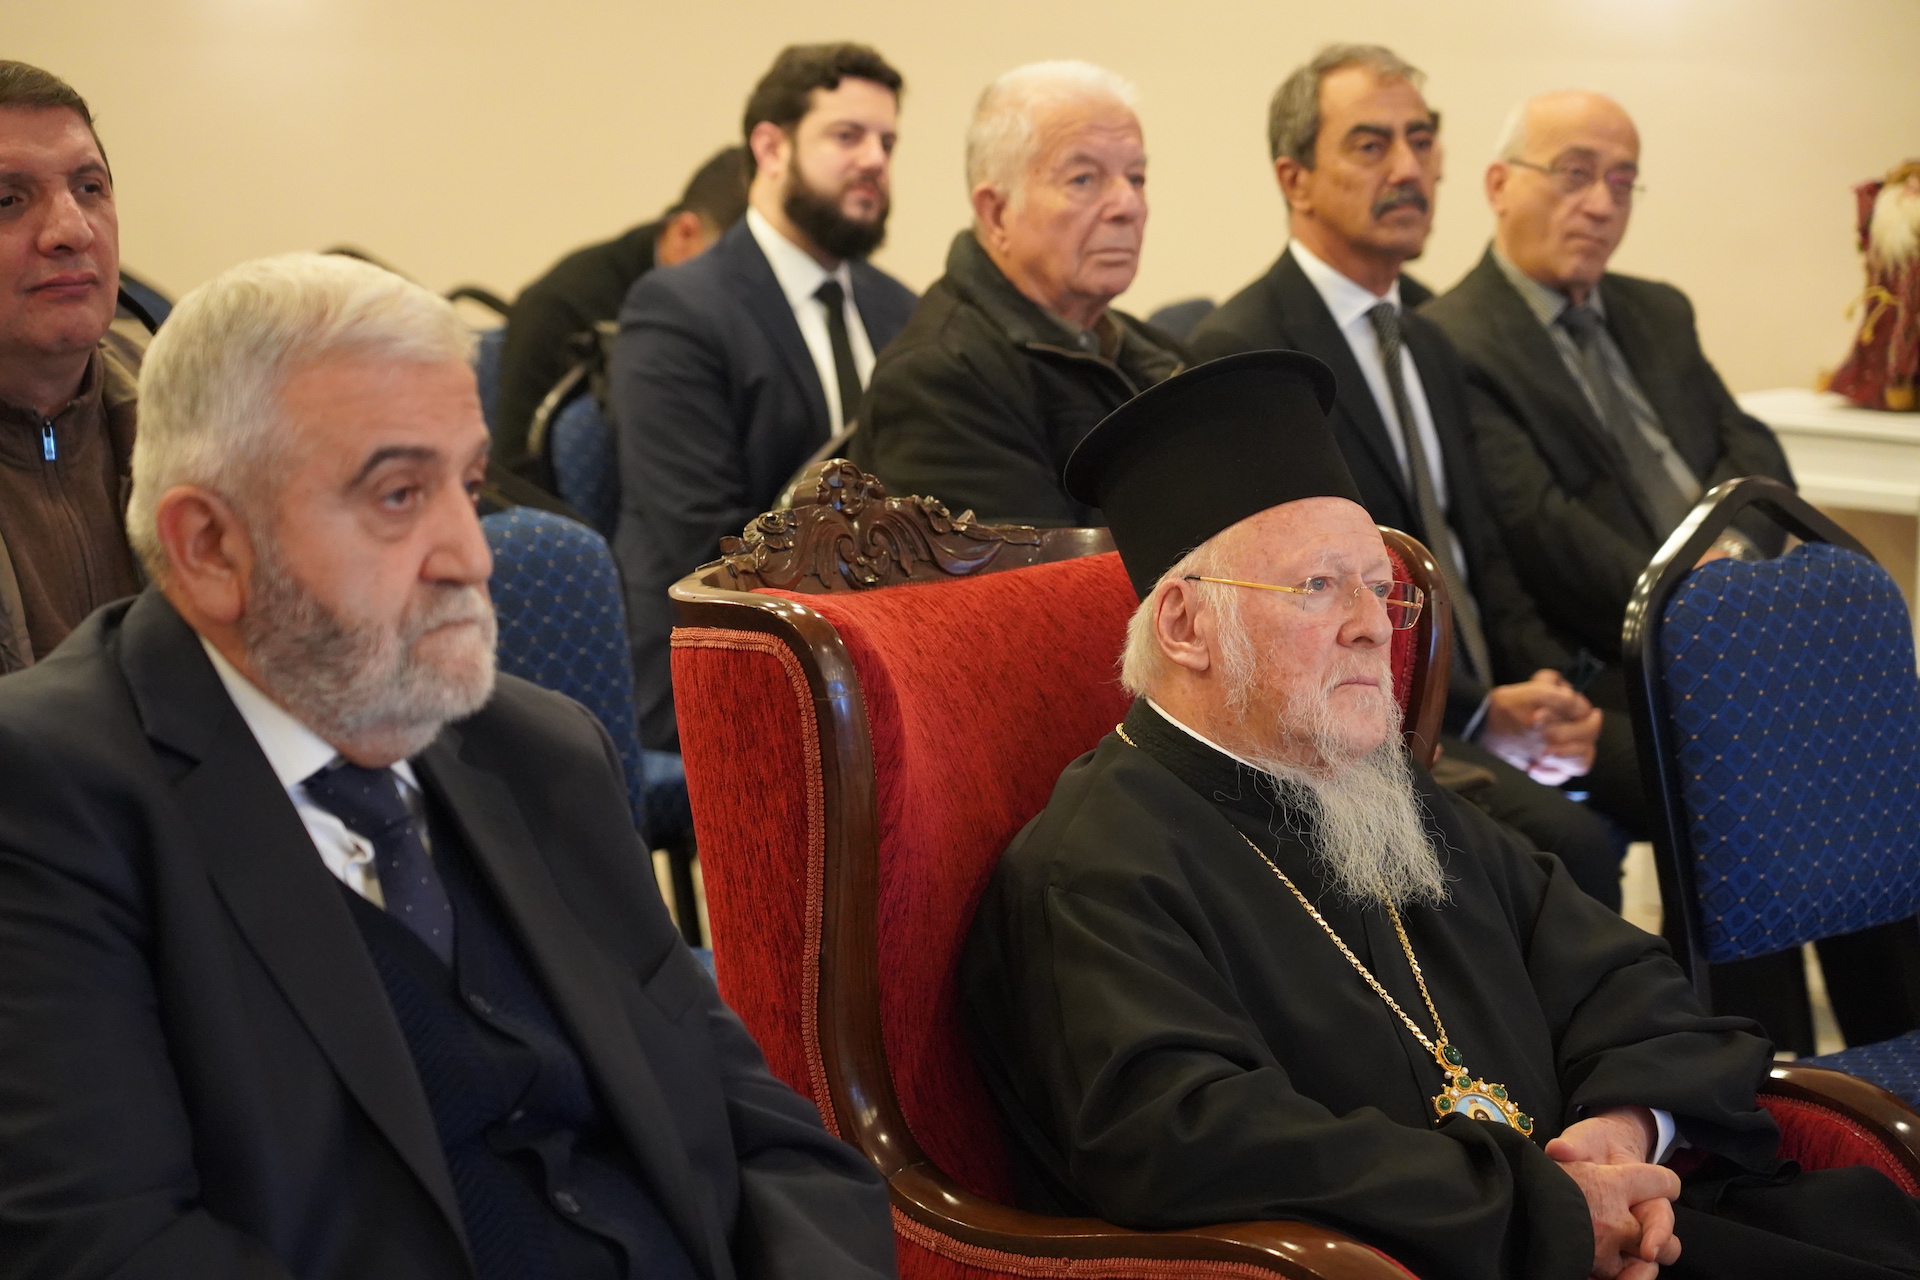 The Ecumenical Patriarch attended the speech of the Metropolitan of Myra